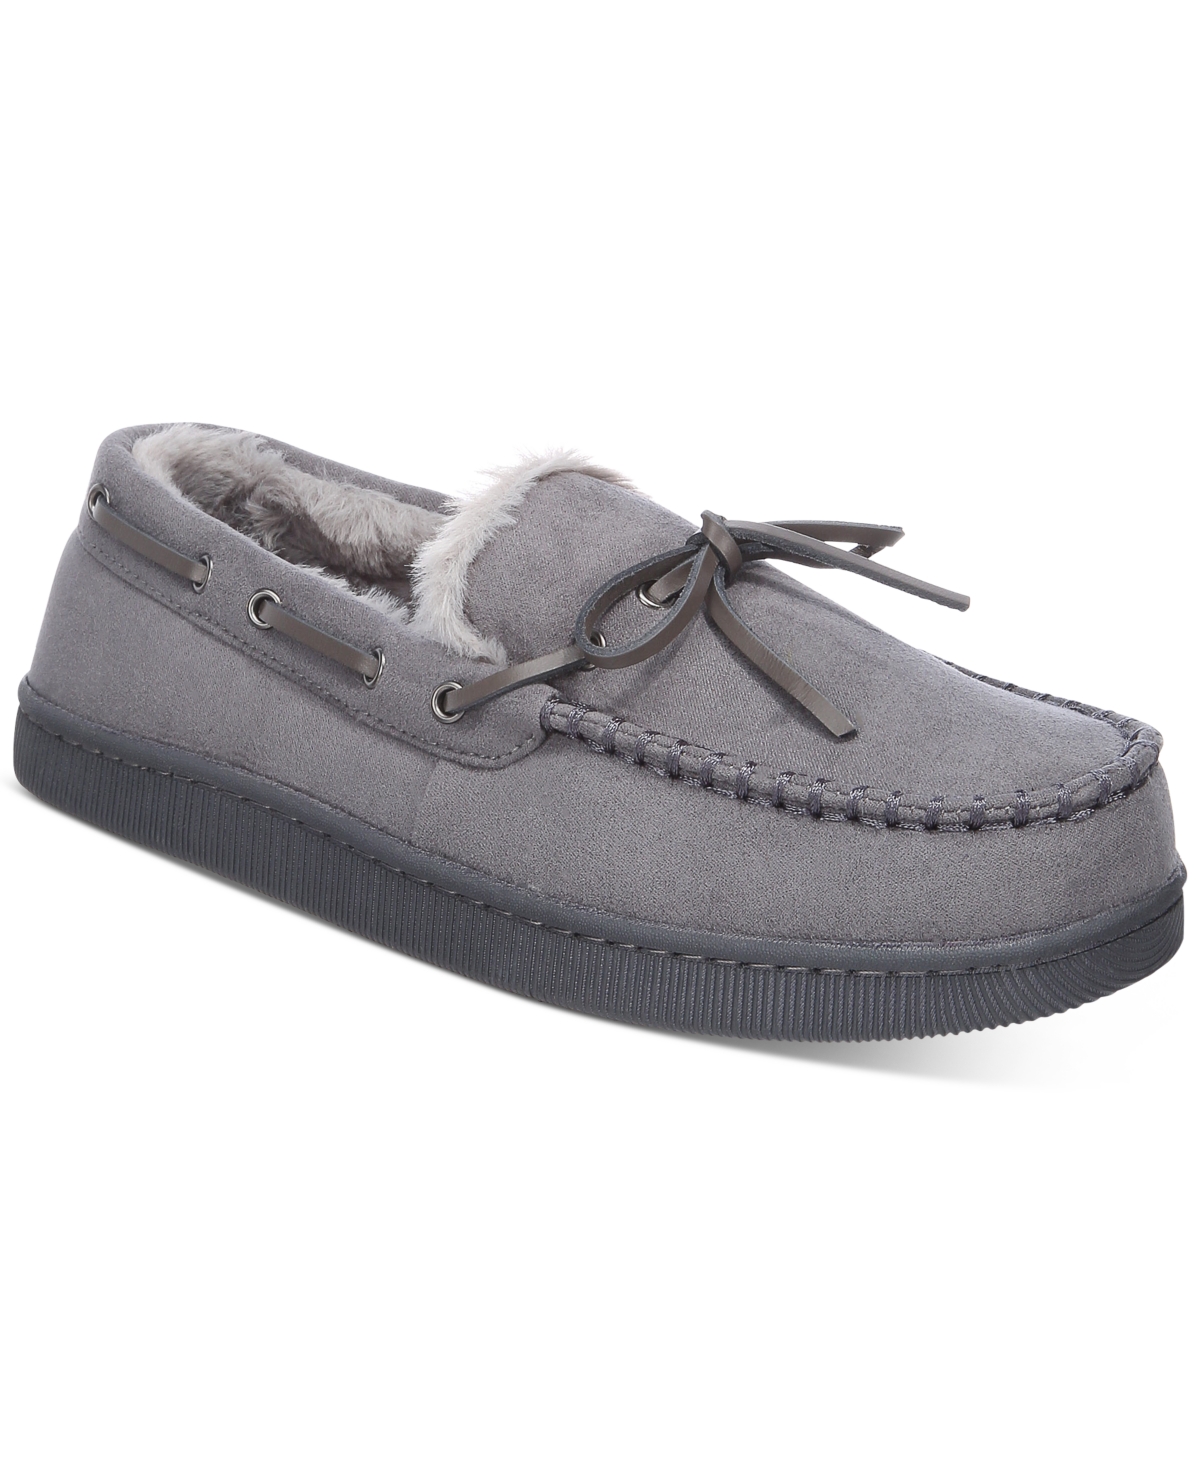 Men's Moccasin Slippers, Created for Macy's - Tan